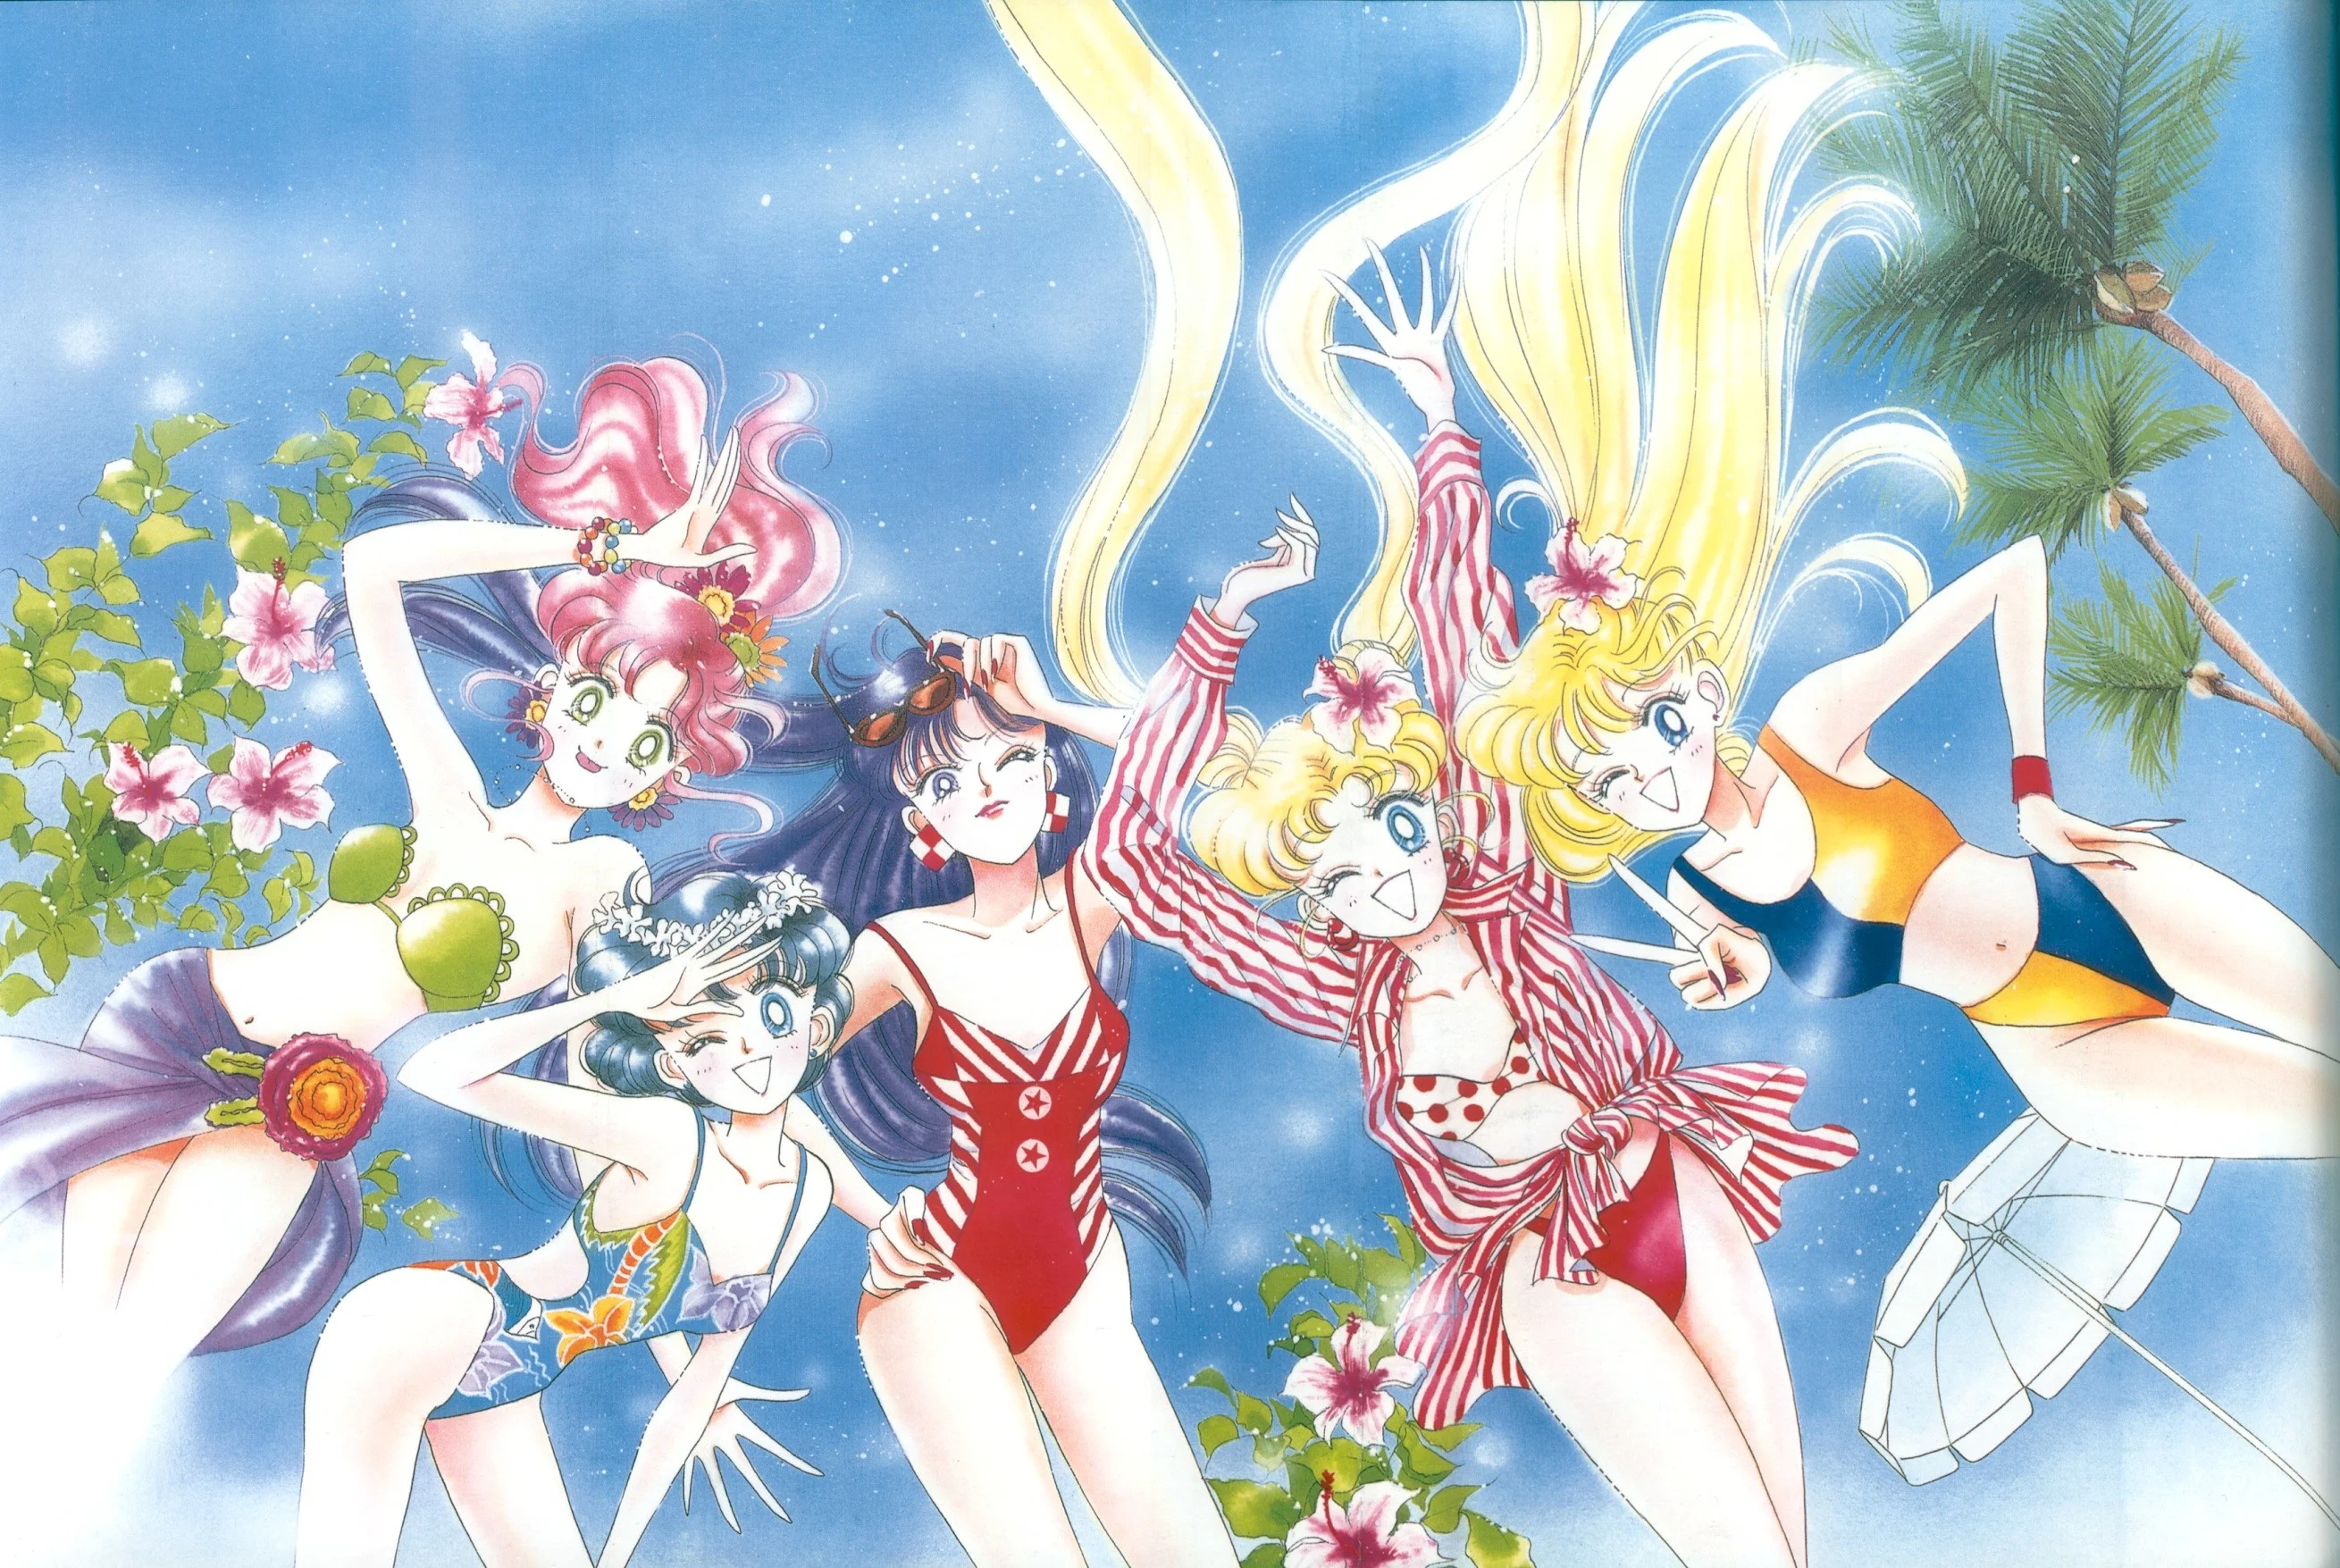 The Bishoujo Senshi Sailor Moon Gengashuu Pretty Soldier Sailor Moon Original Picture Collection are artbooks which reprint the color illustrations